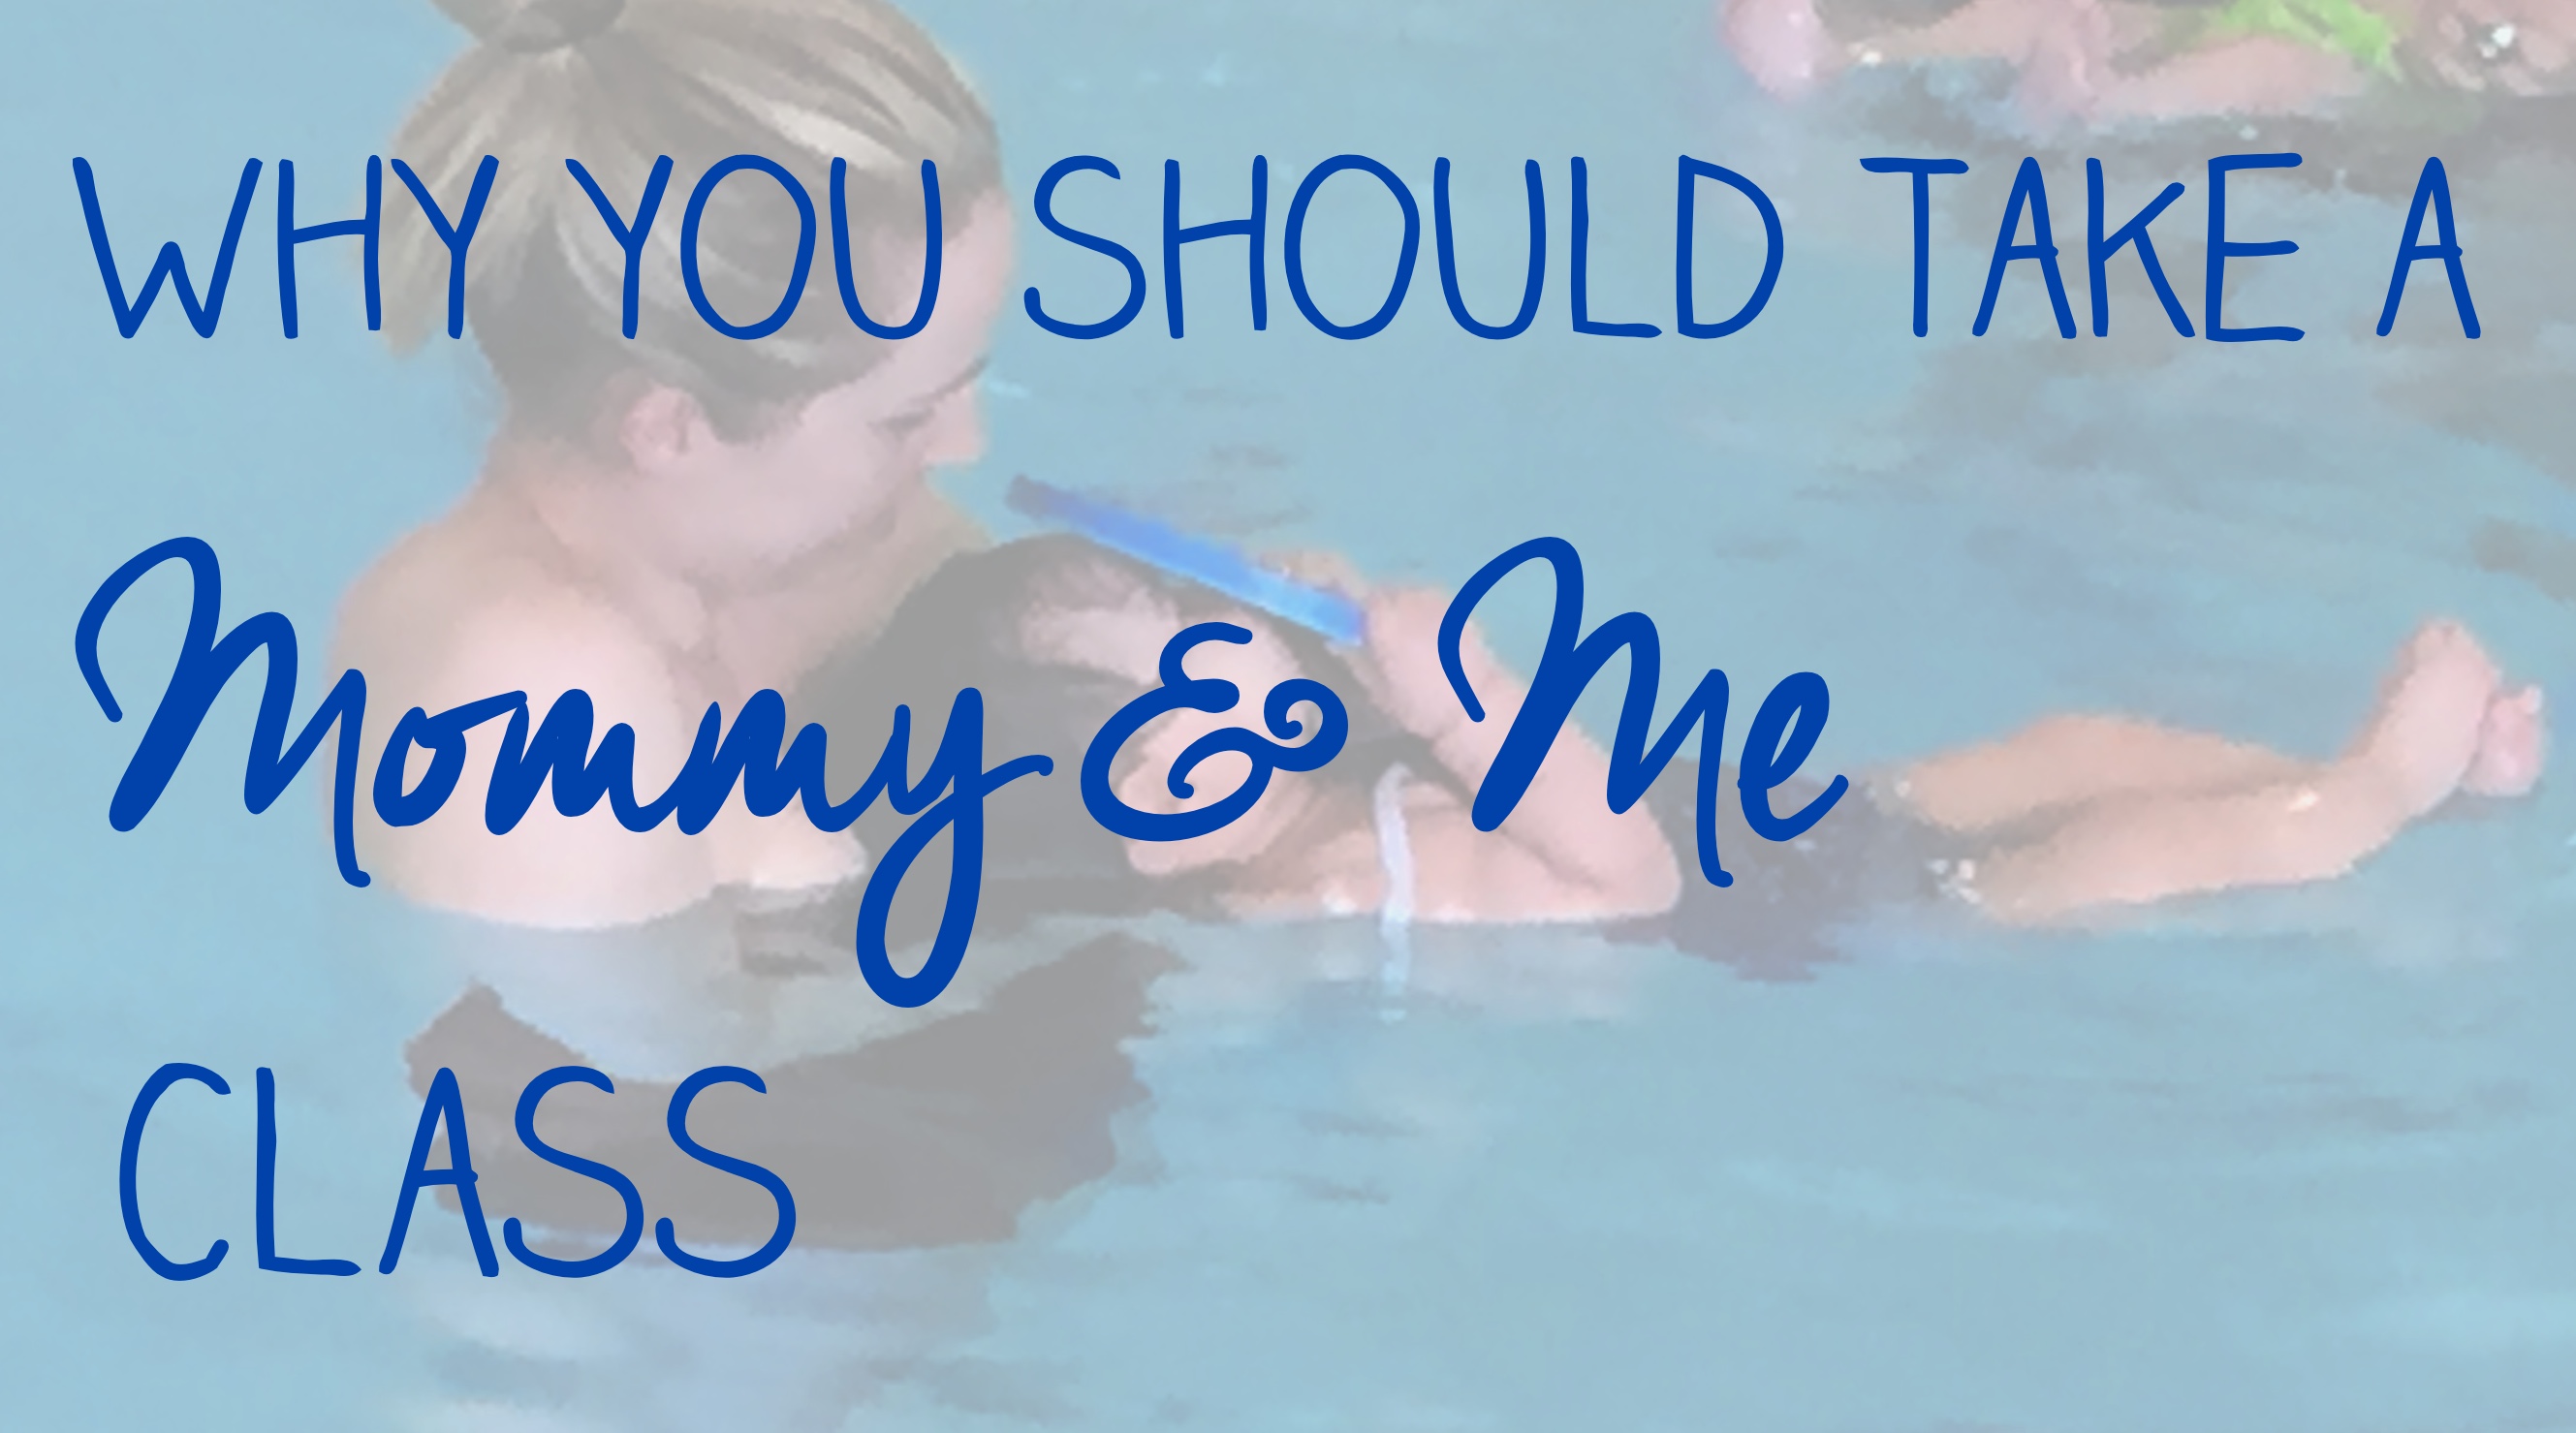 text graphic: Why you should take a "Mommy and Me" class